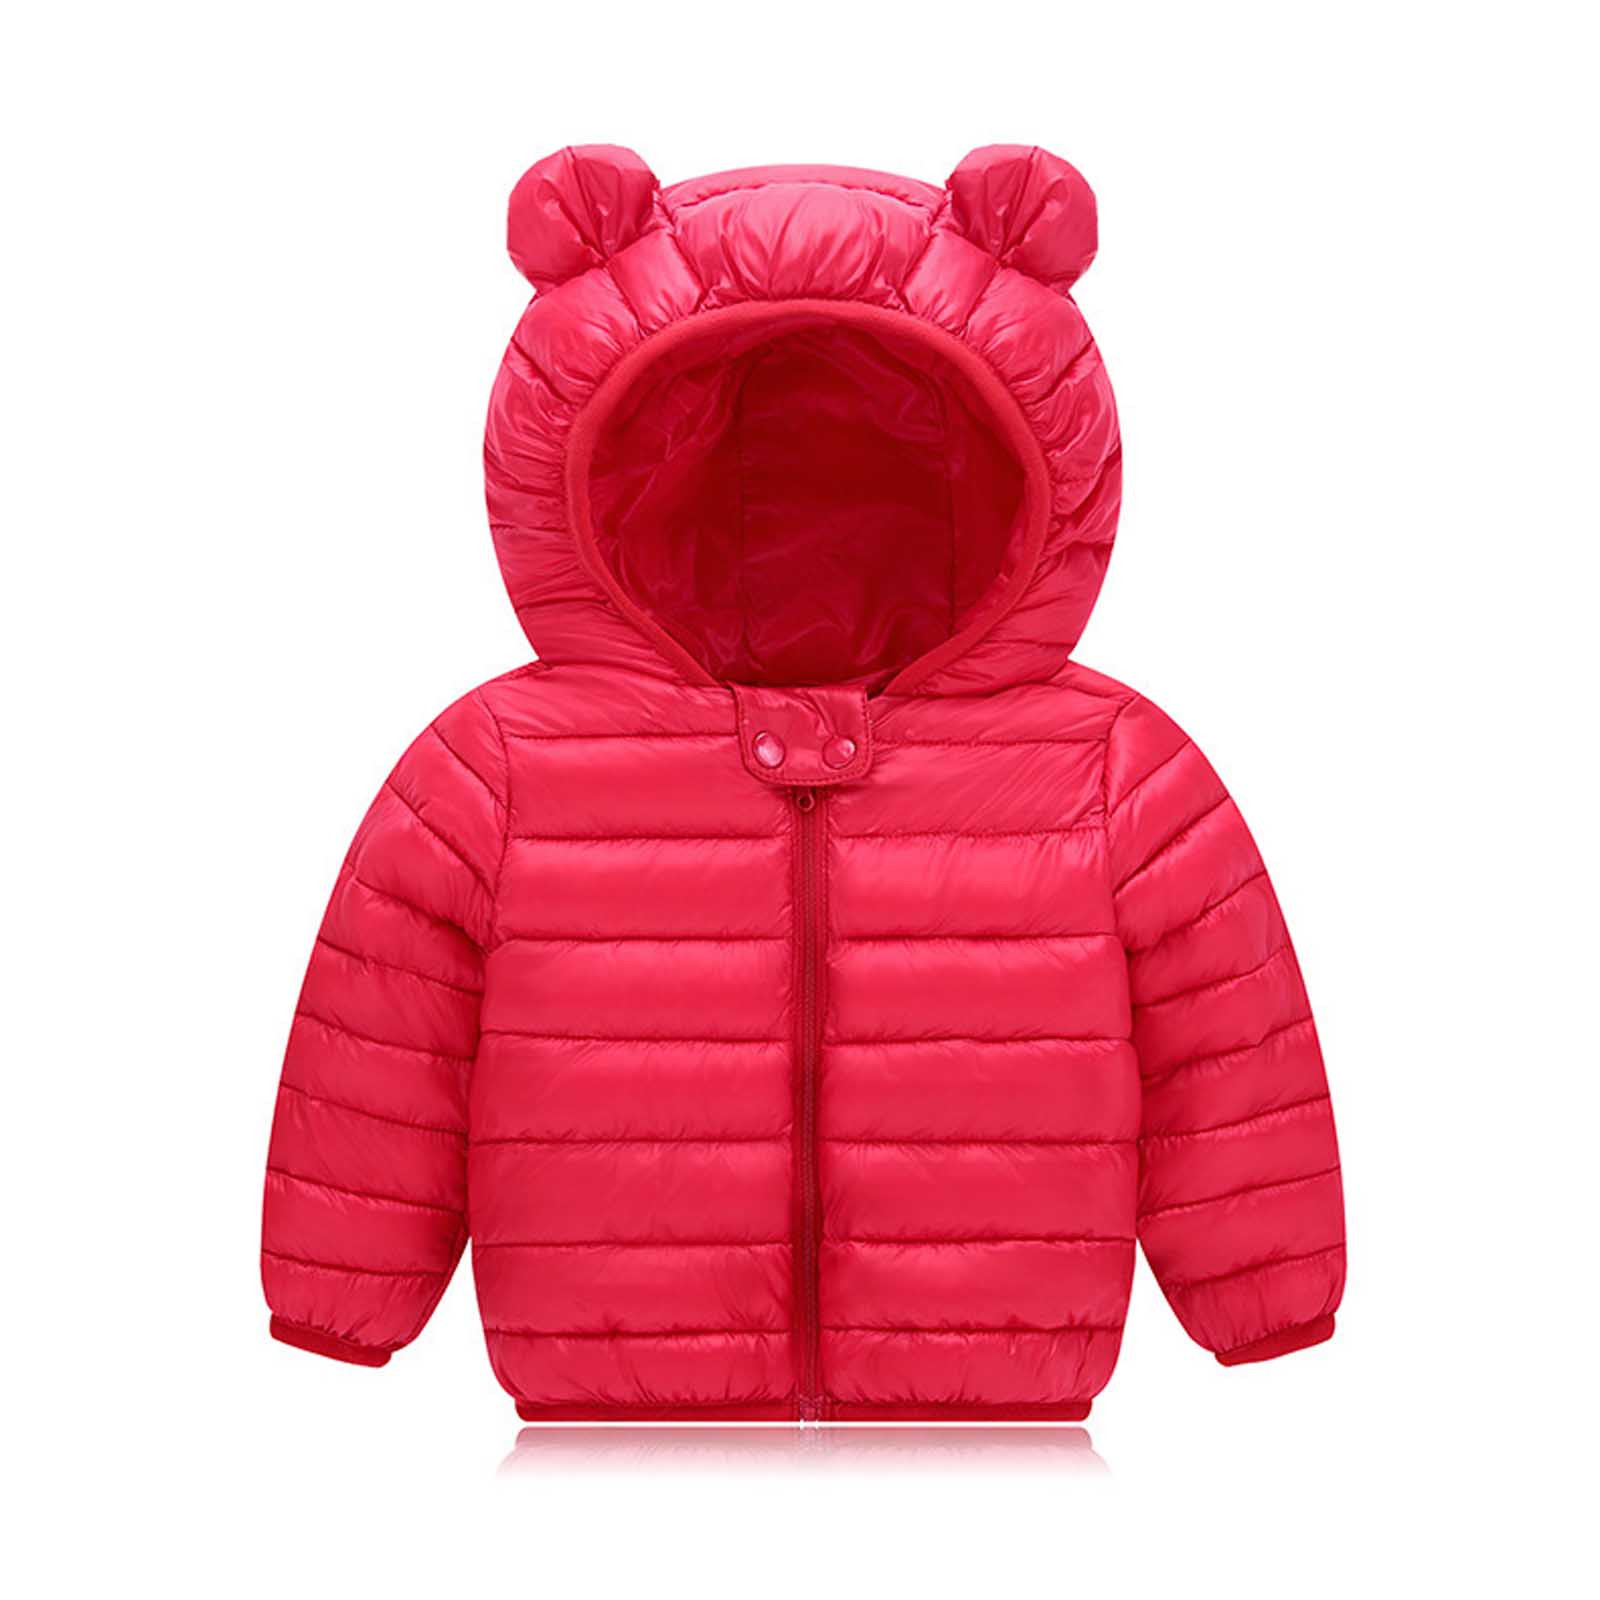 Lenago Kids Snow Down Girl Boy Winter Coat Boys Girls Thick Coat Padded Winter Jacket Clothes Down Jacket for 2-3 Years - image 1 of 2